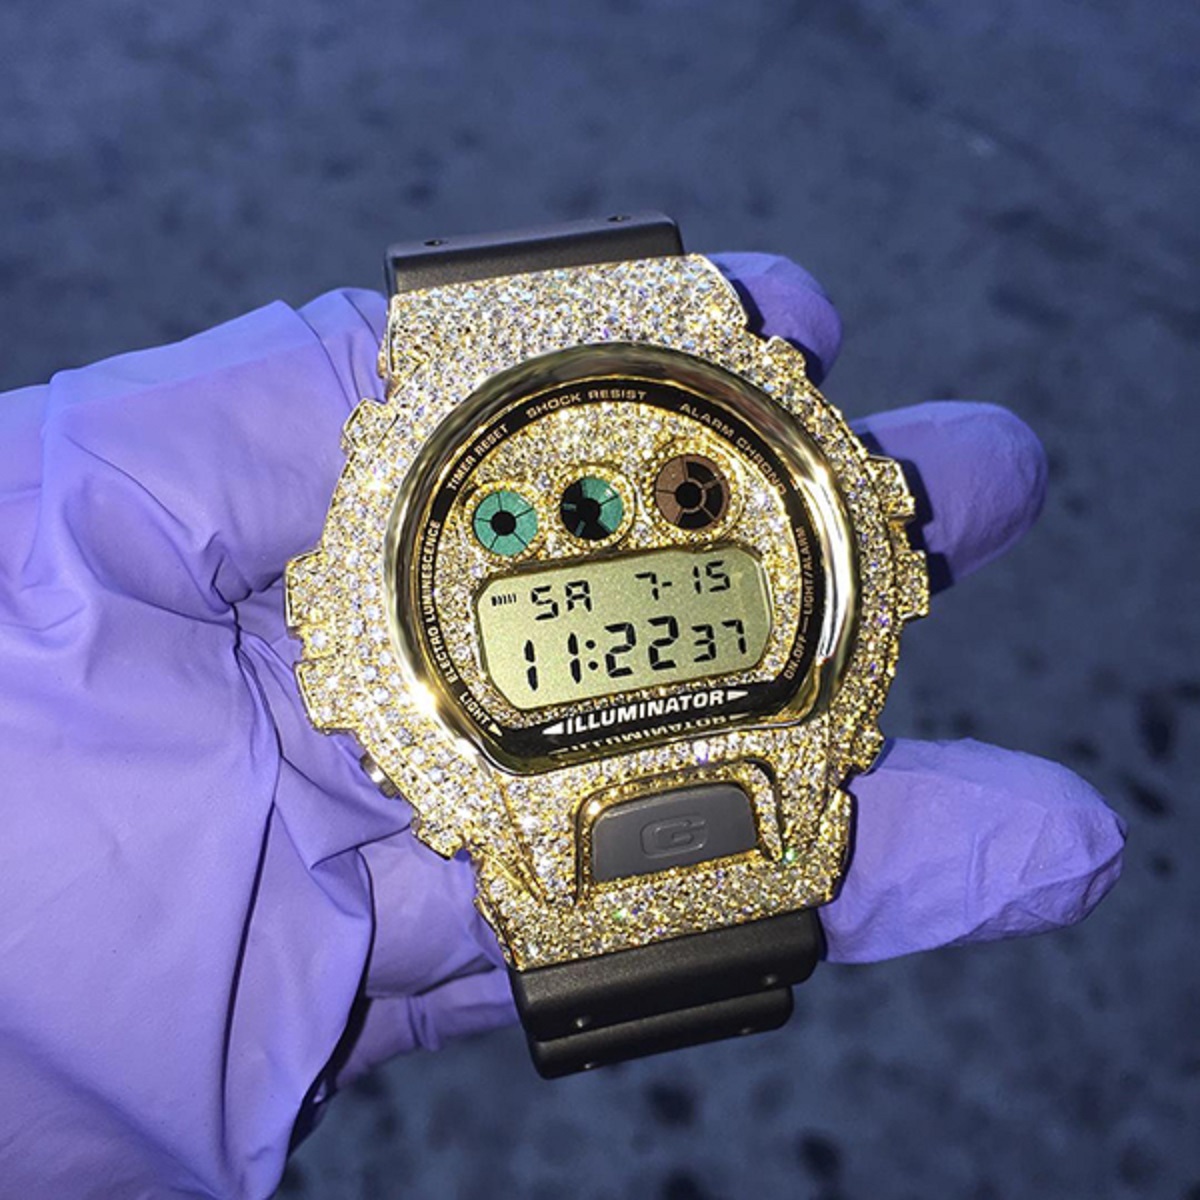 “$10K worth of diamonds on a $10 watch. Of course.”